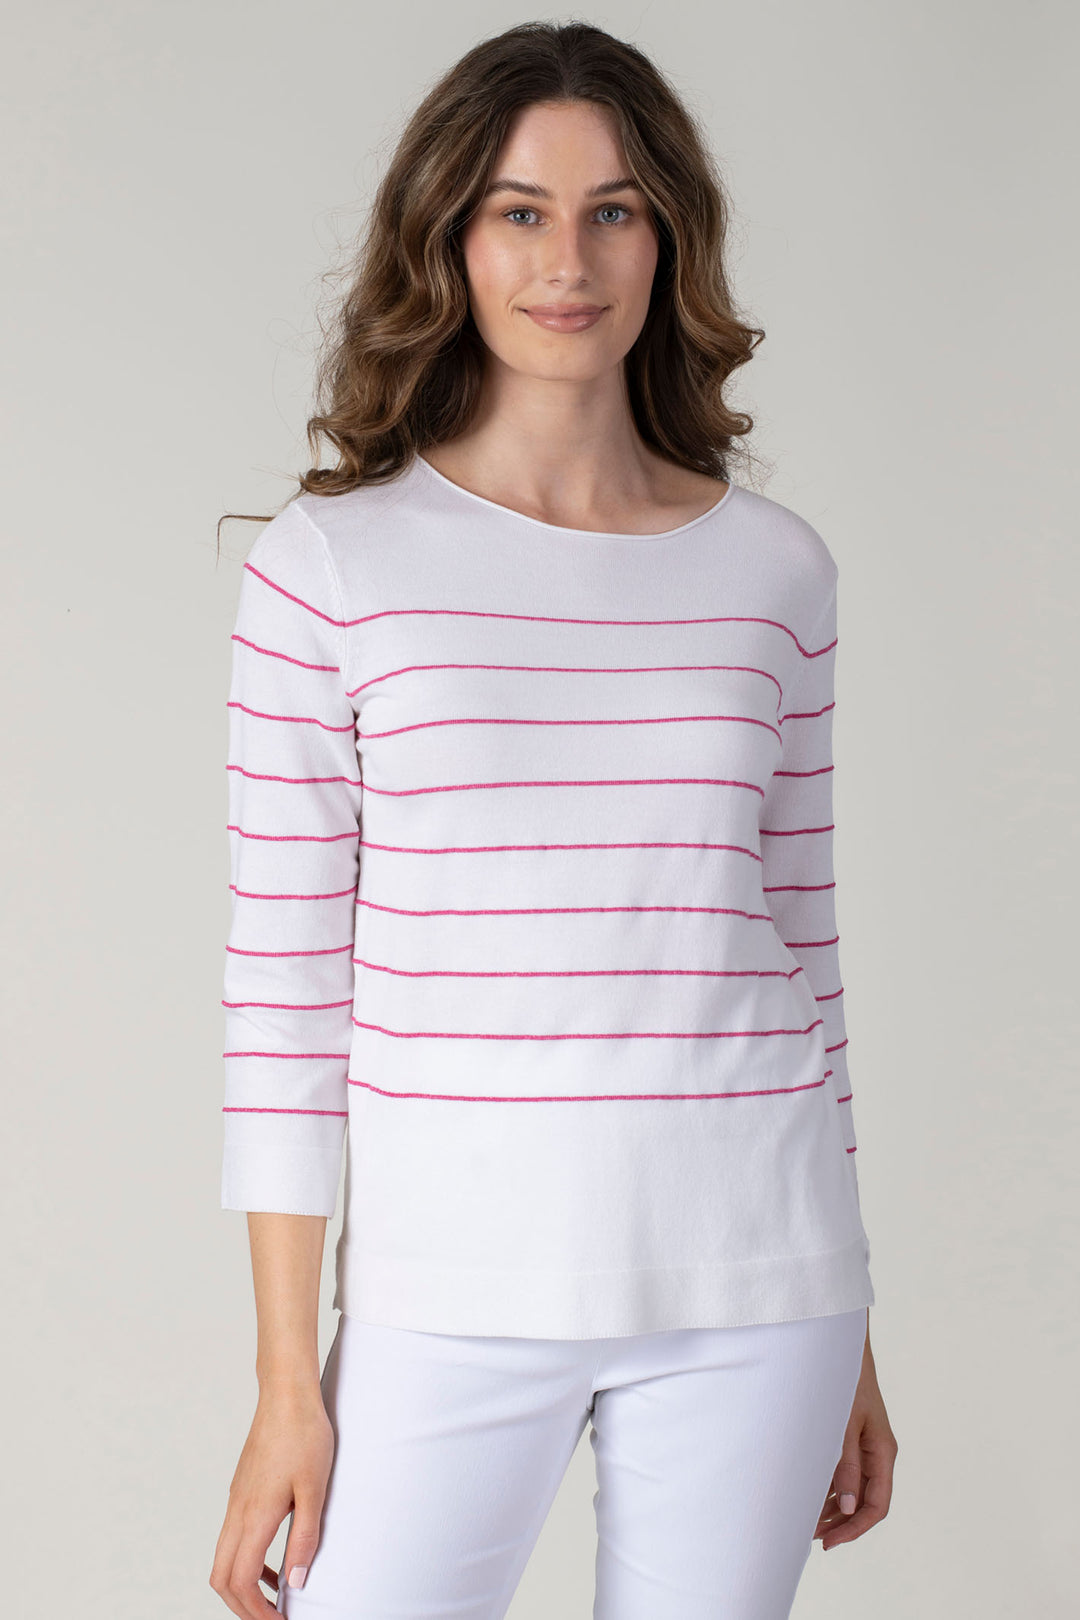 Jessica Graaf 27164 White Fuchsia Pink Stripe Long Sleeve Jumper - Experience Boutique